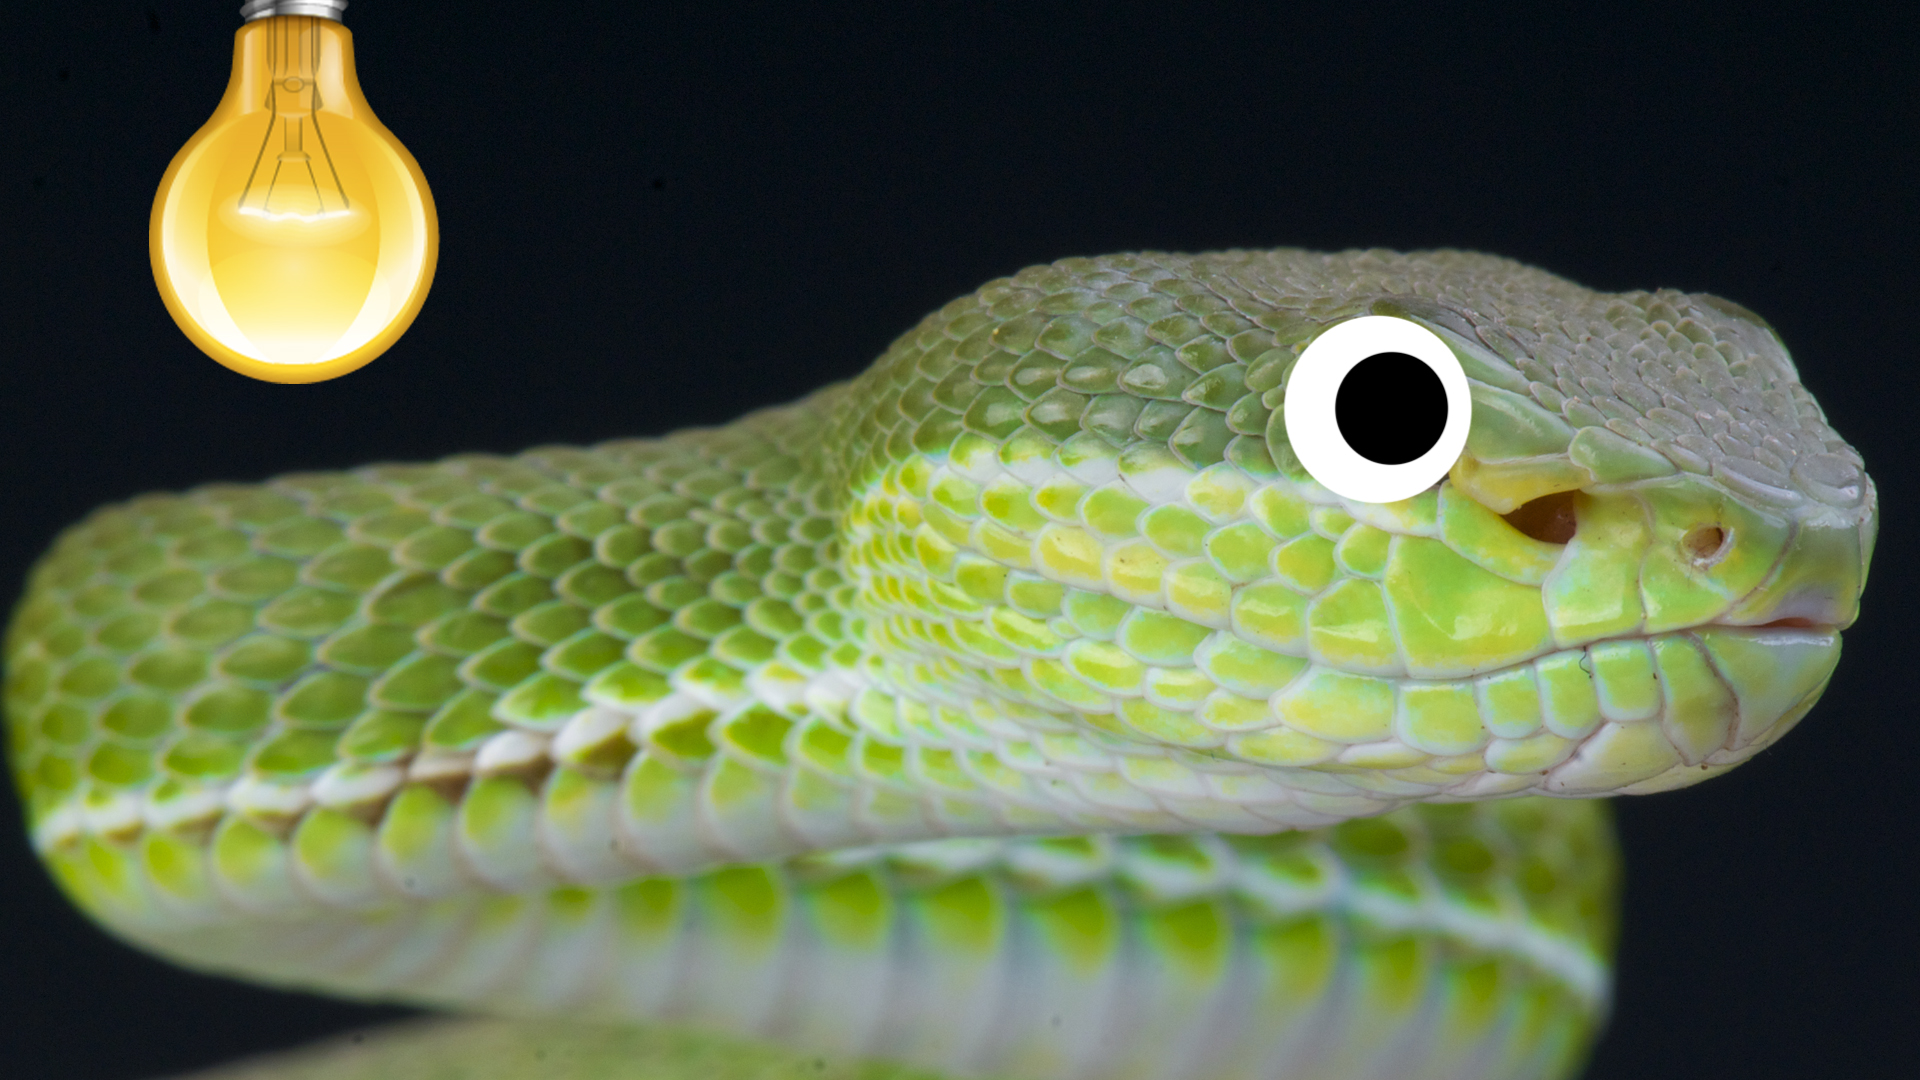 A pit viper in the dark, illuminated by a lightbulb